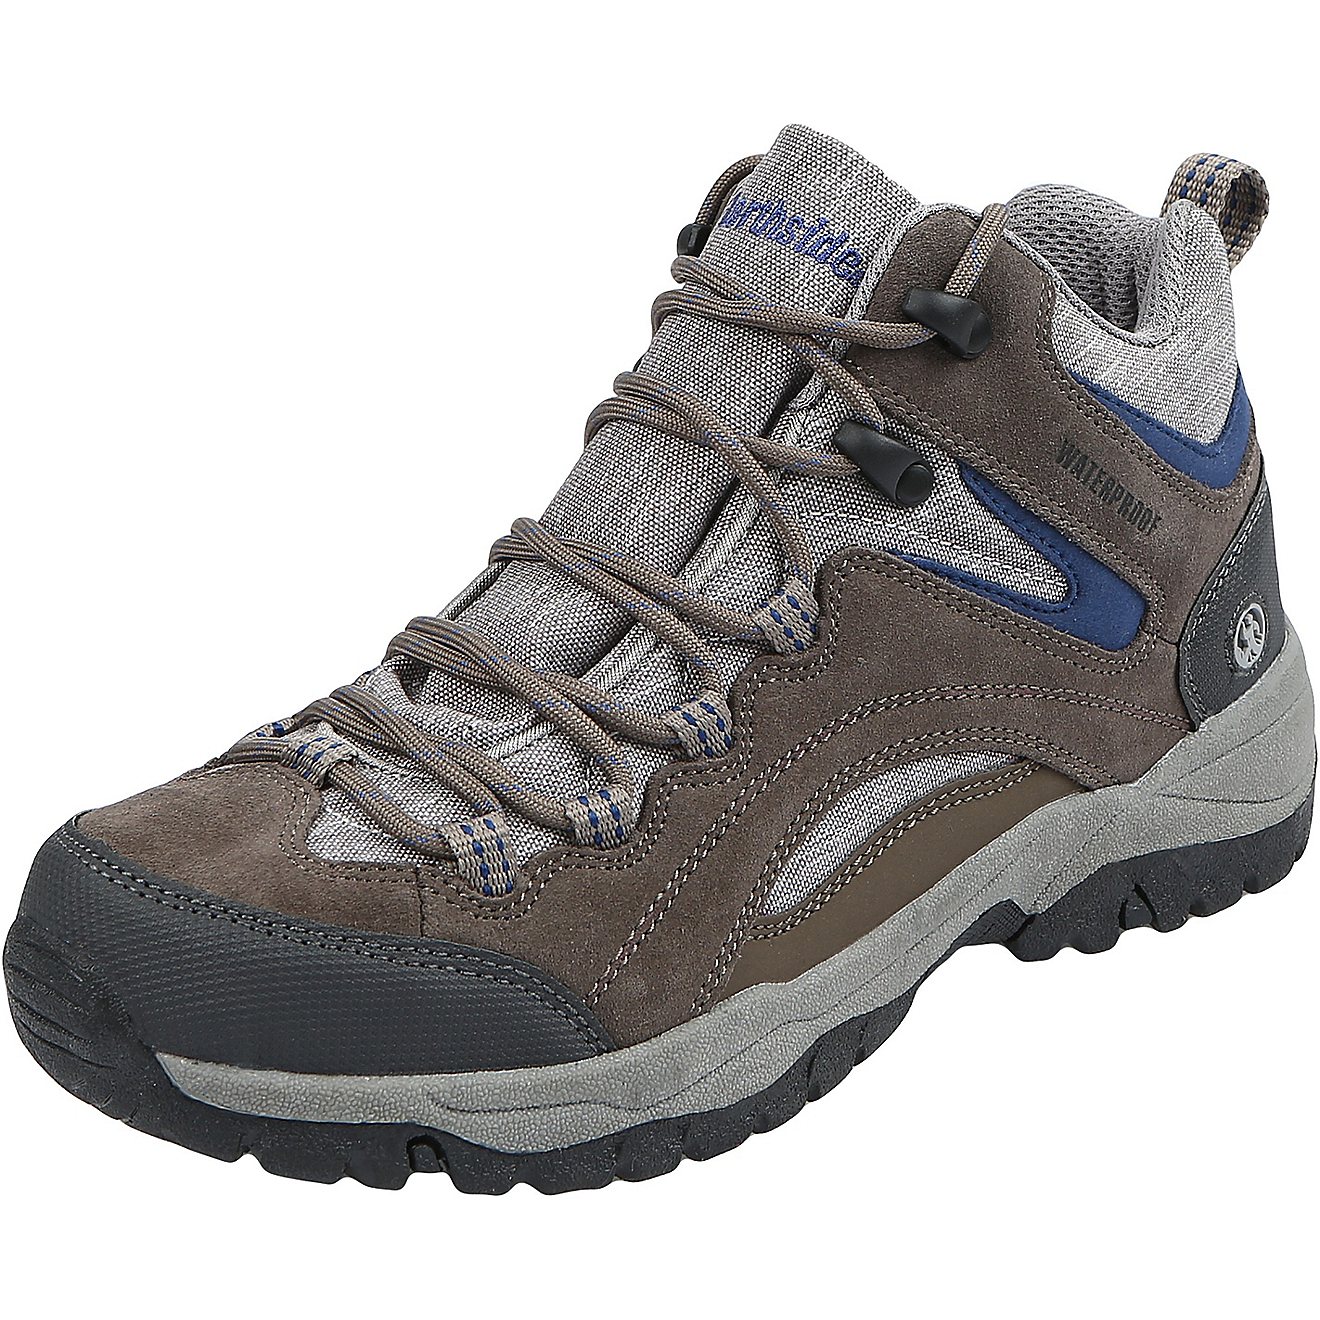 Northside Women's Pioneer Hiking Shoes                                                                                           - view number 2